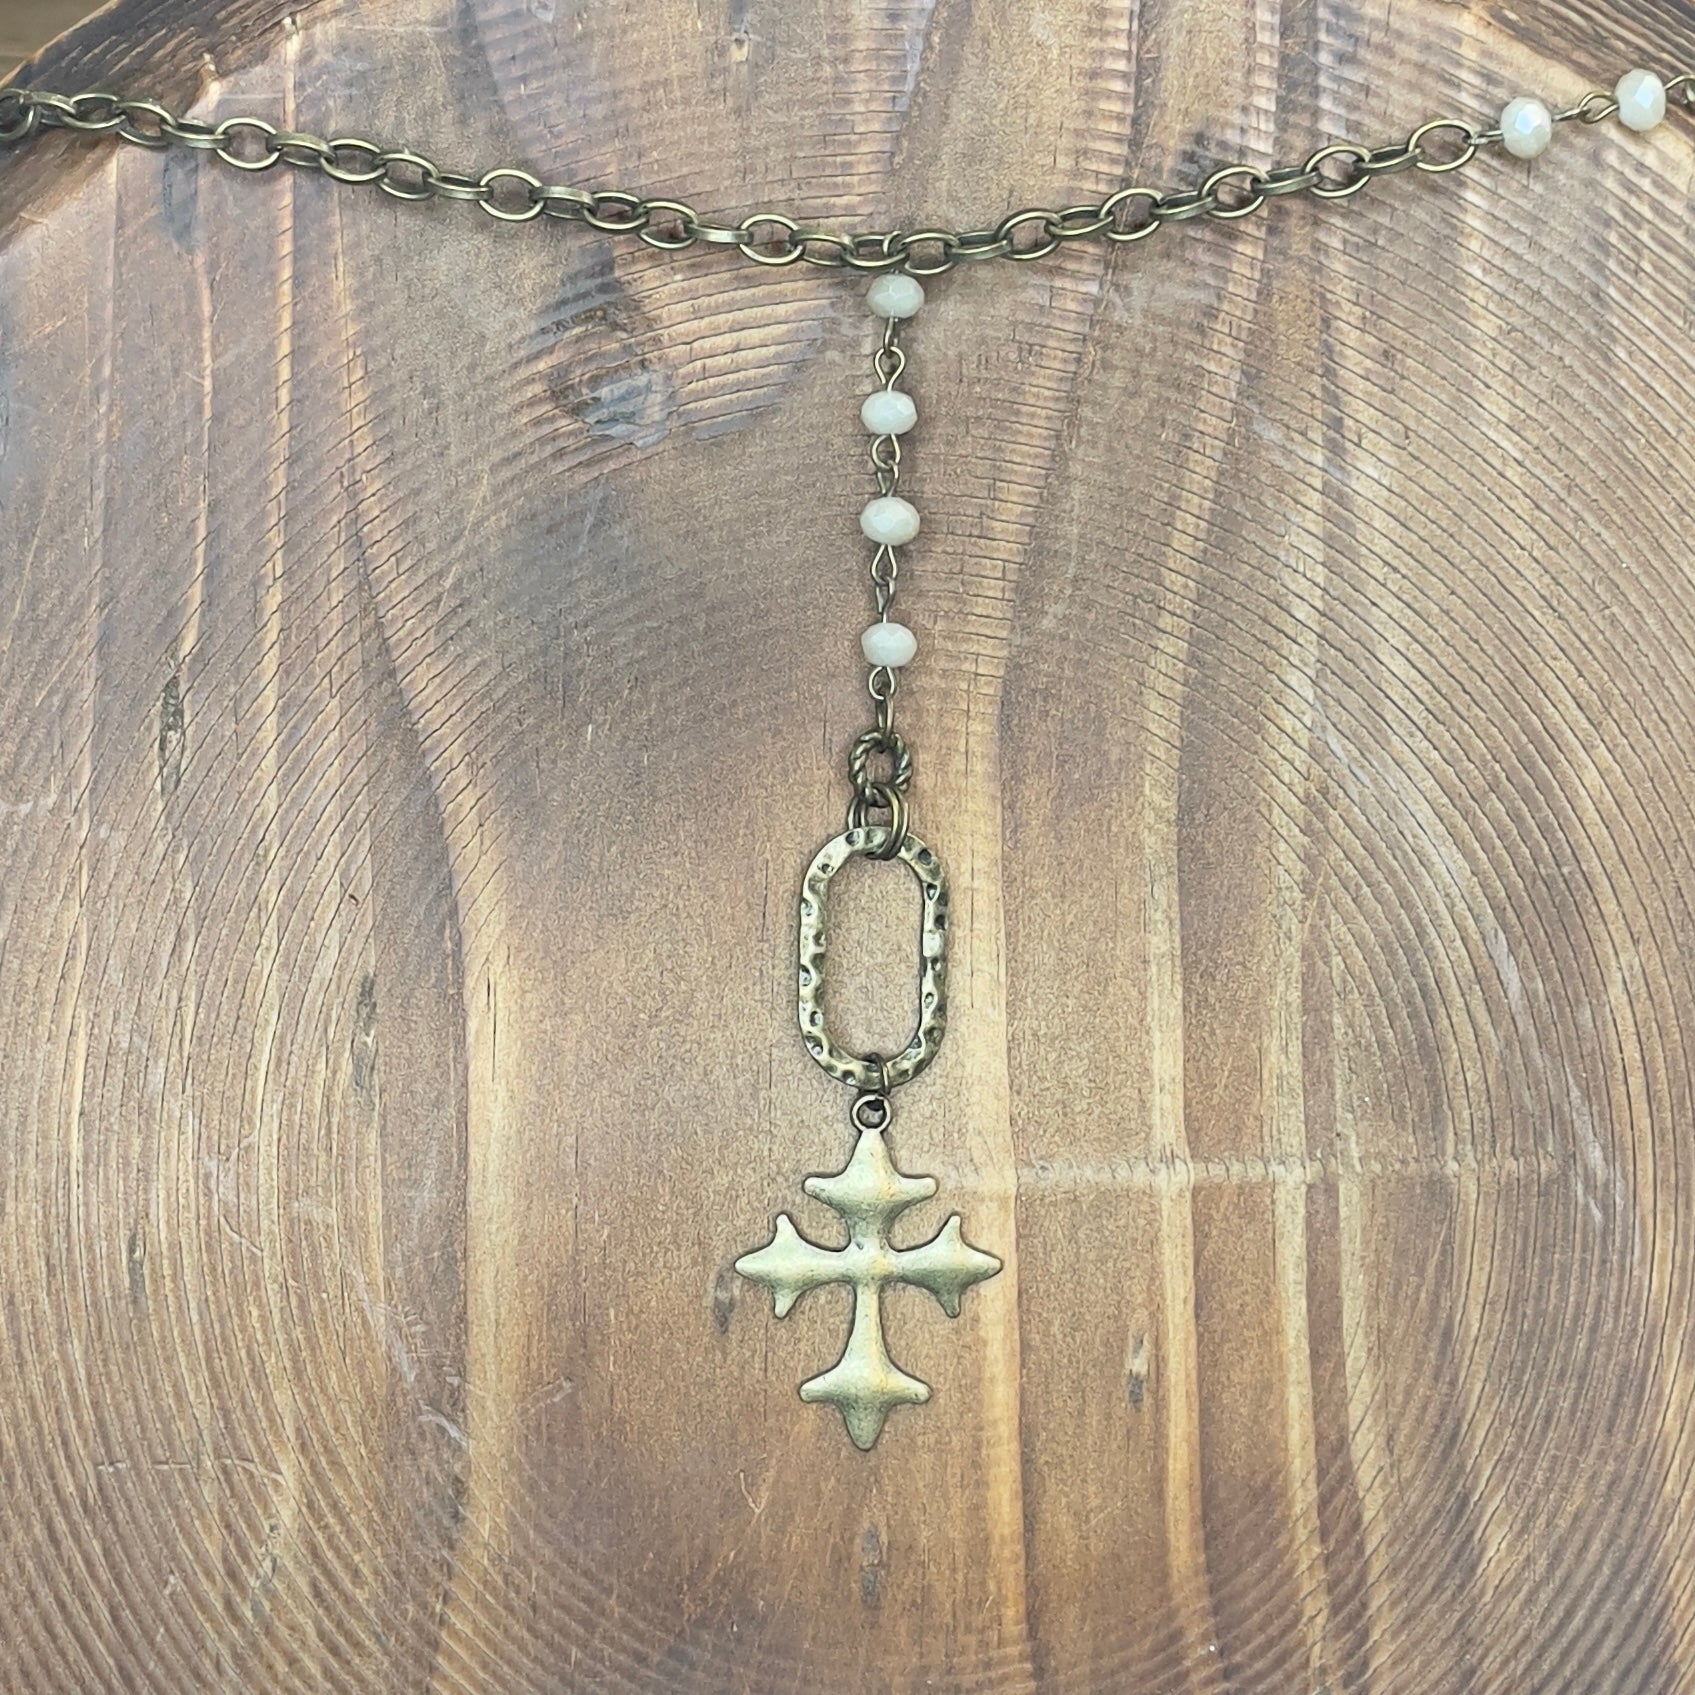 NECKLACE ANTIQUE GOLD WITH CROSS PENDANT